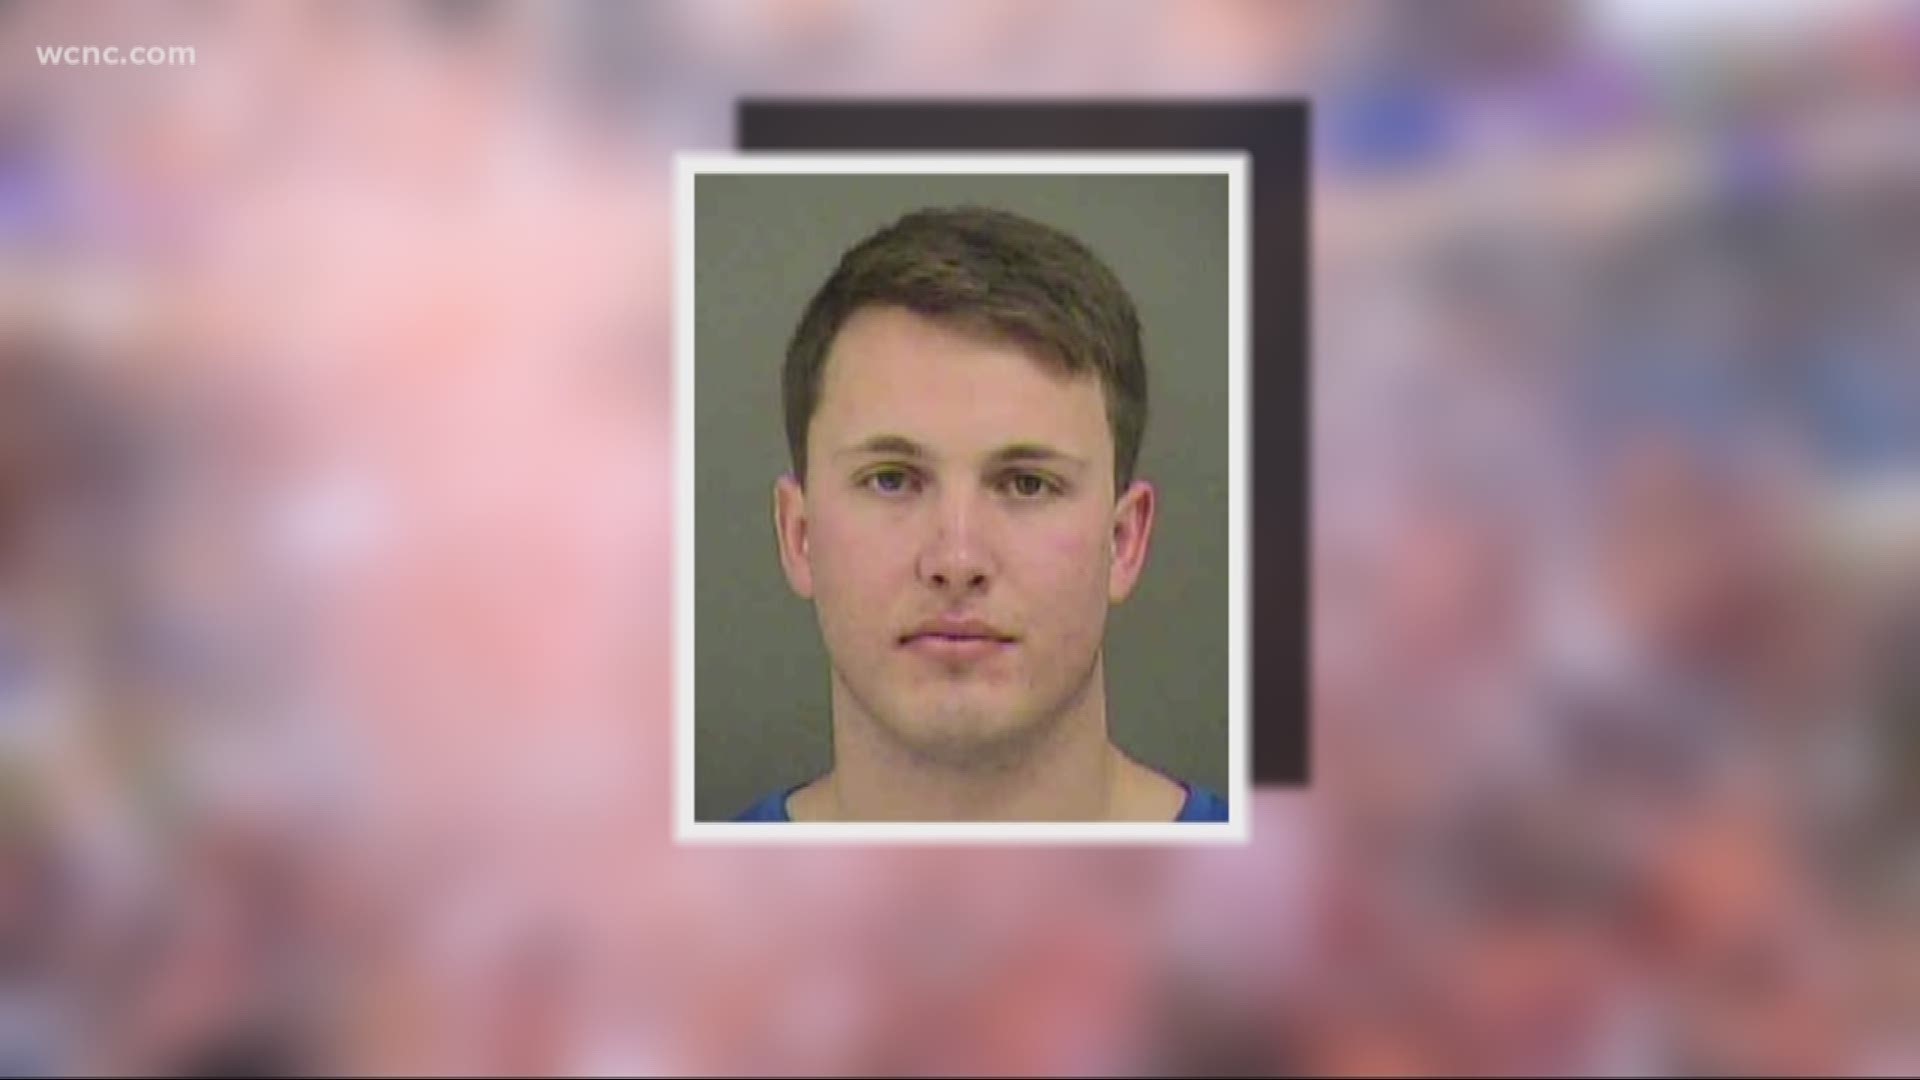 CMPD charged 22-year-old Reed Fletcher with misdemeanor assault and battery, according to the Mecklenburg County Sheriff's Office.